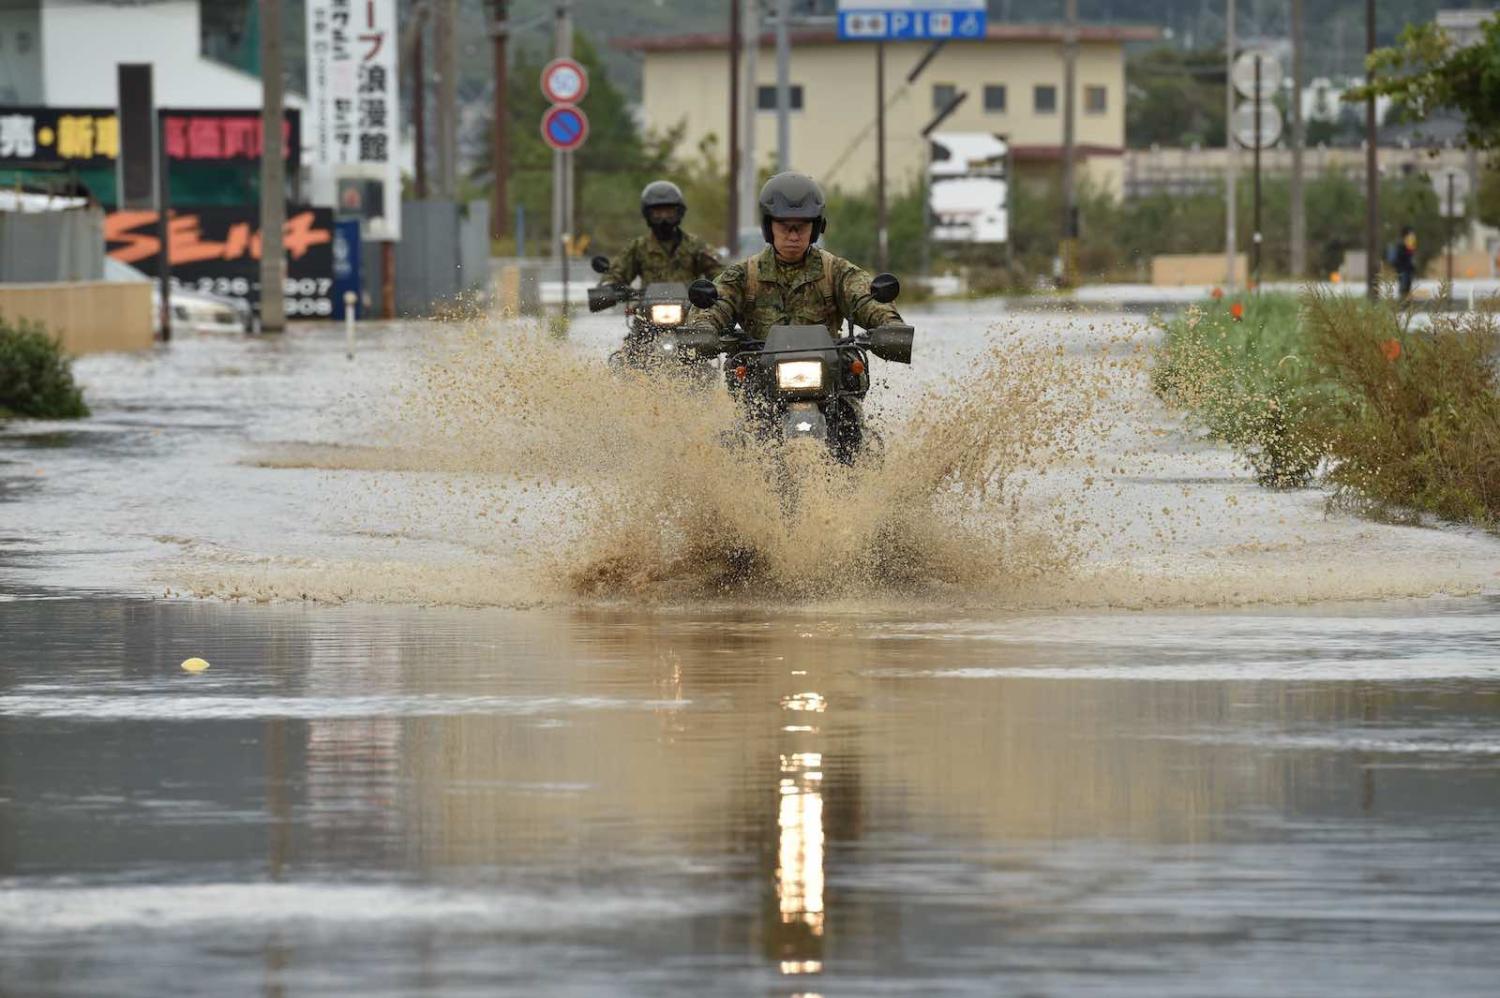 Military personnel drive their motorbikes down a flooded street in the aftermath of Typhoon Hagibis in Nagano on 14 October (Photo: Kazuhiro Nogi/AFP/Getty Images)